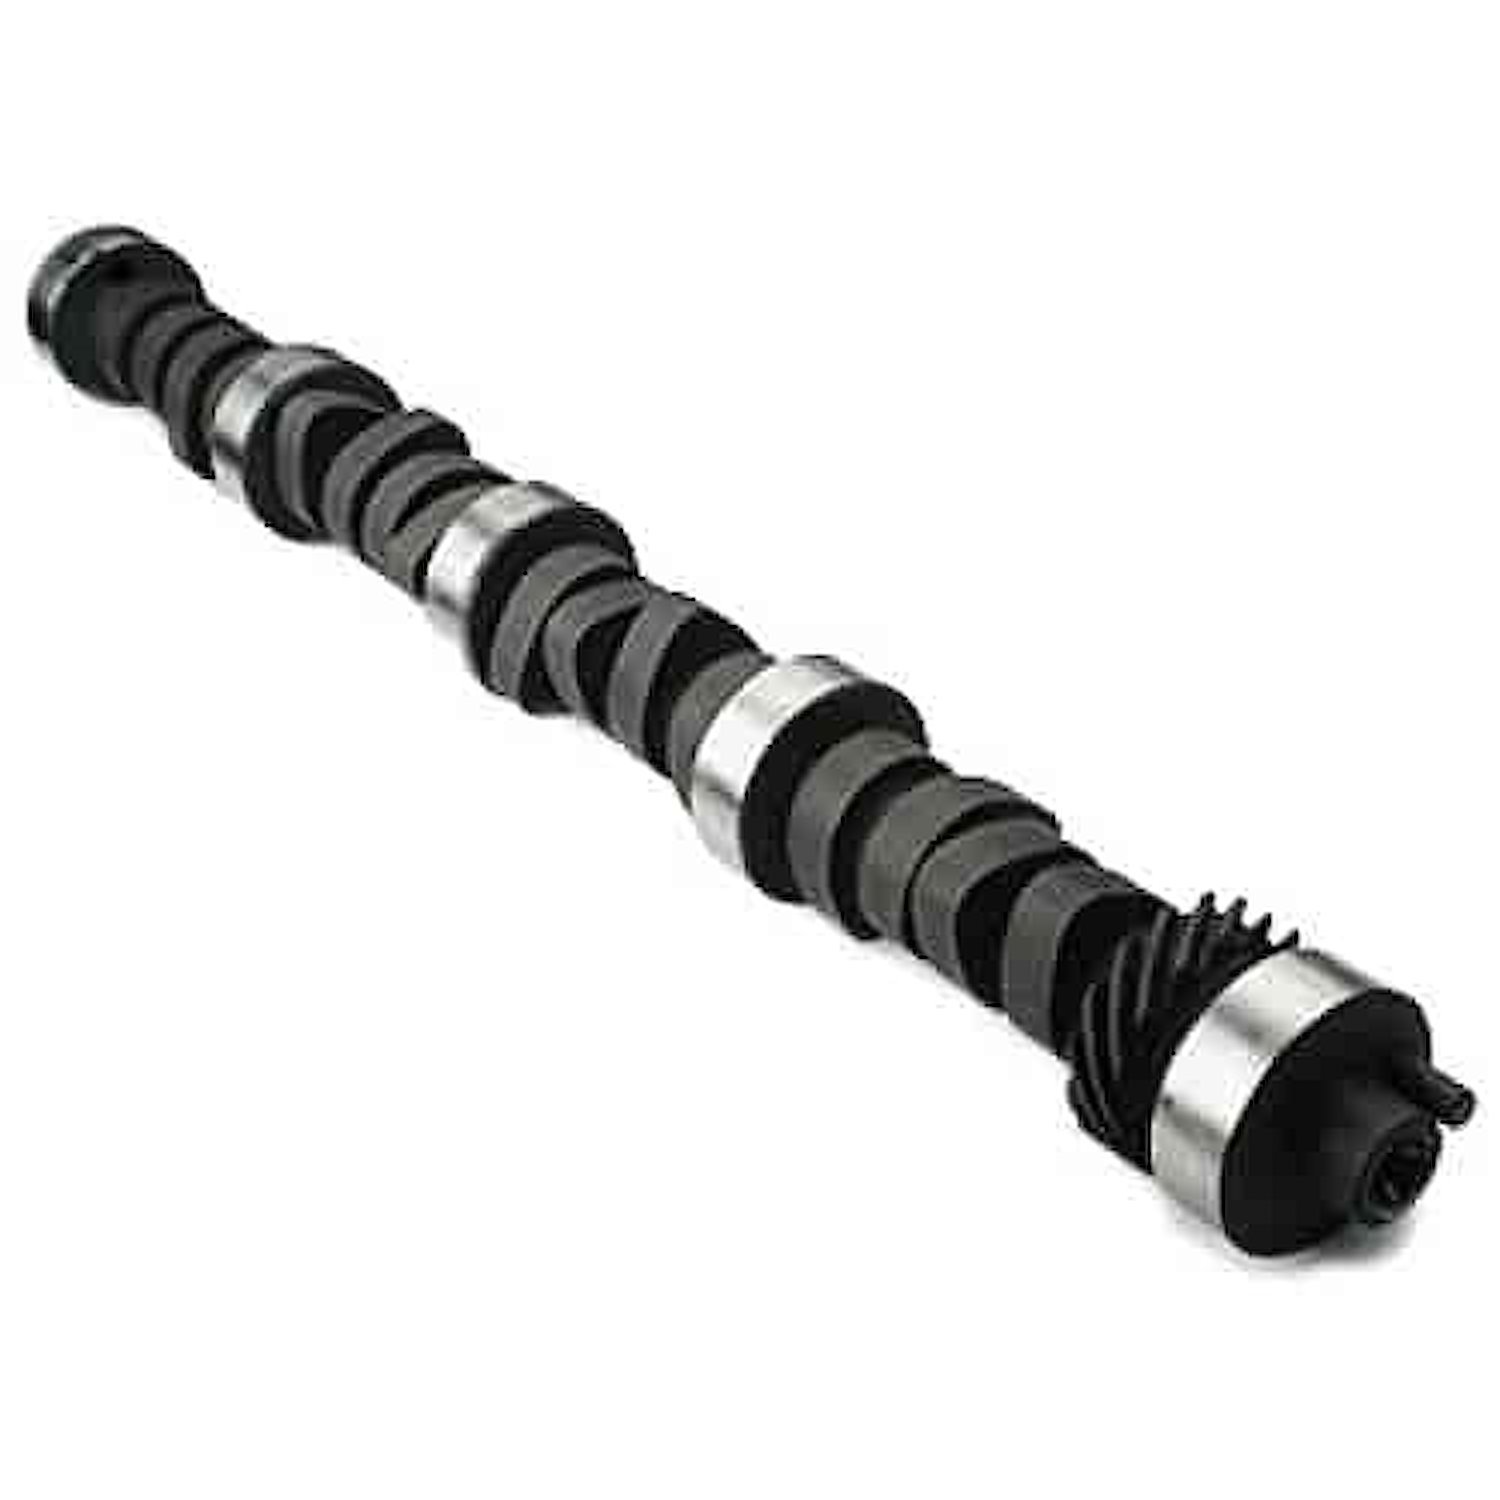 Monarch Flat Tappet Camshaft for Ford 351C, 351M, 400